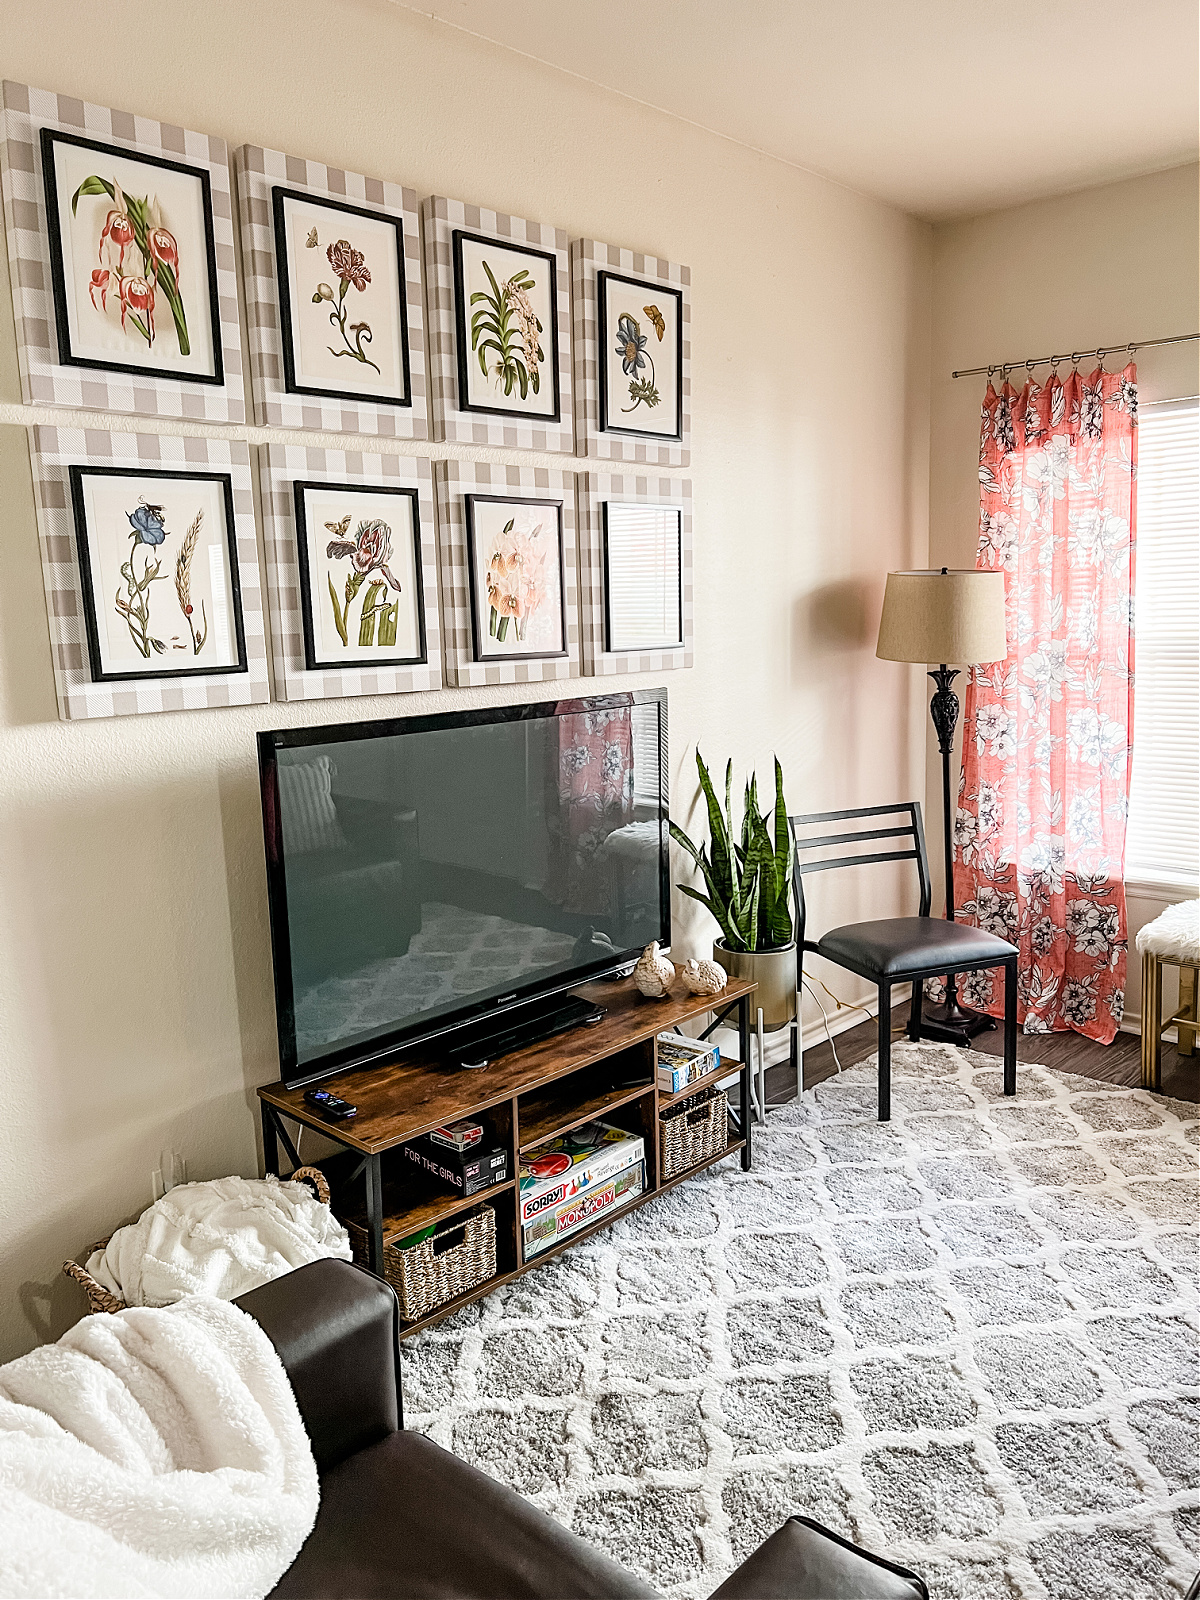 Expert tips for apartments decorating ideas for the living room on a budget